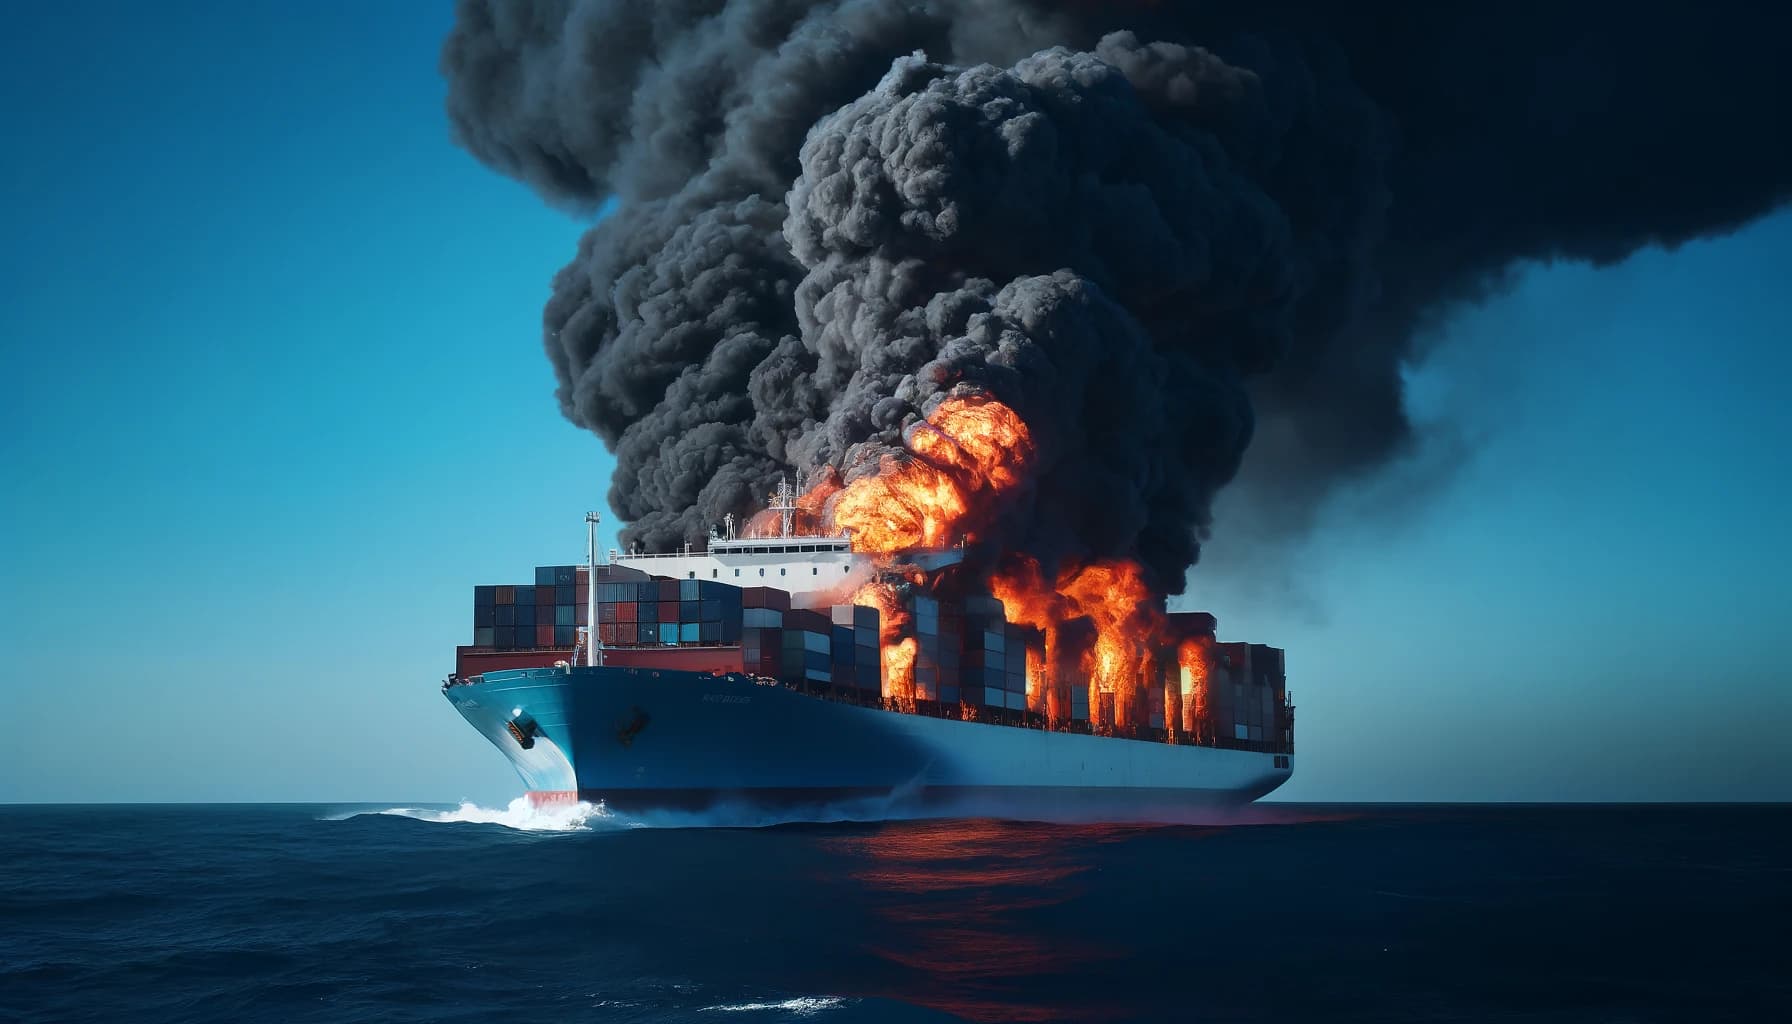 A container ship on fire at sea